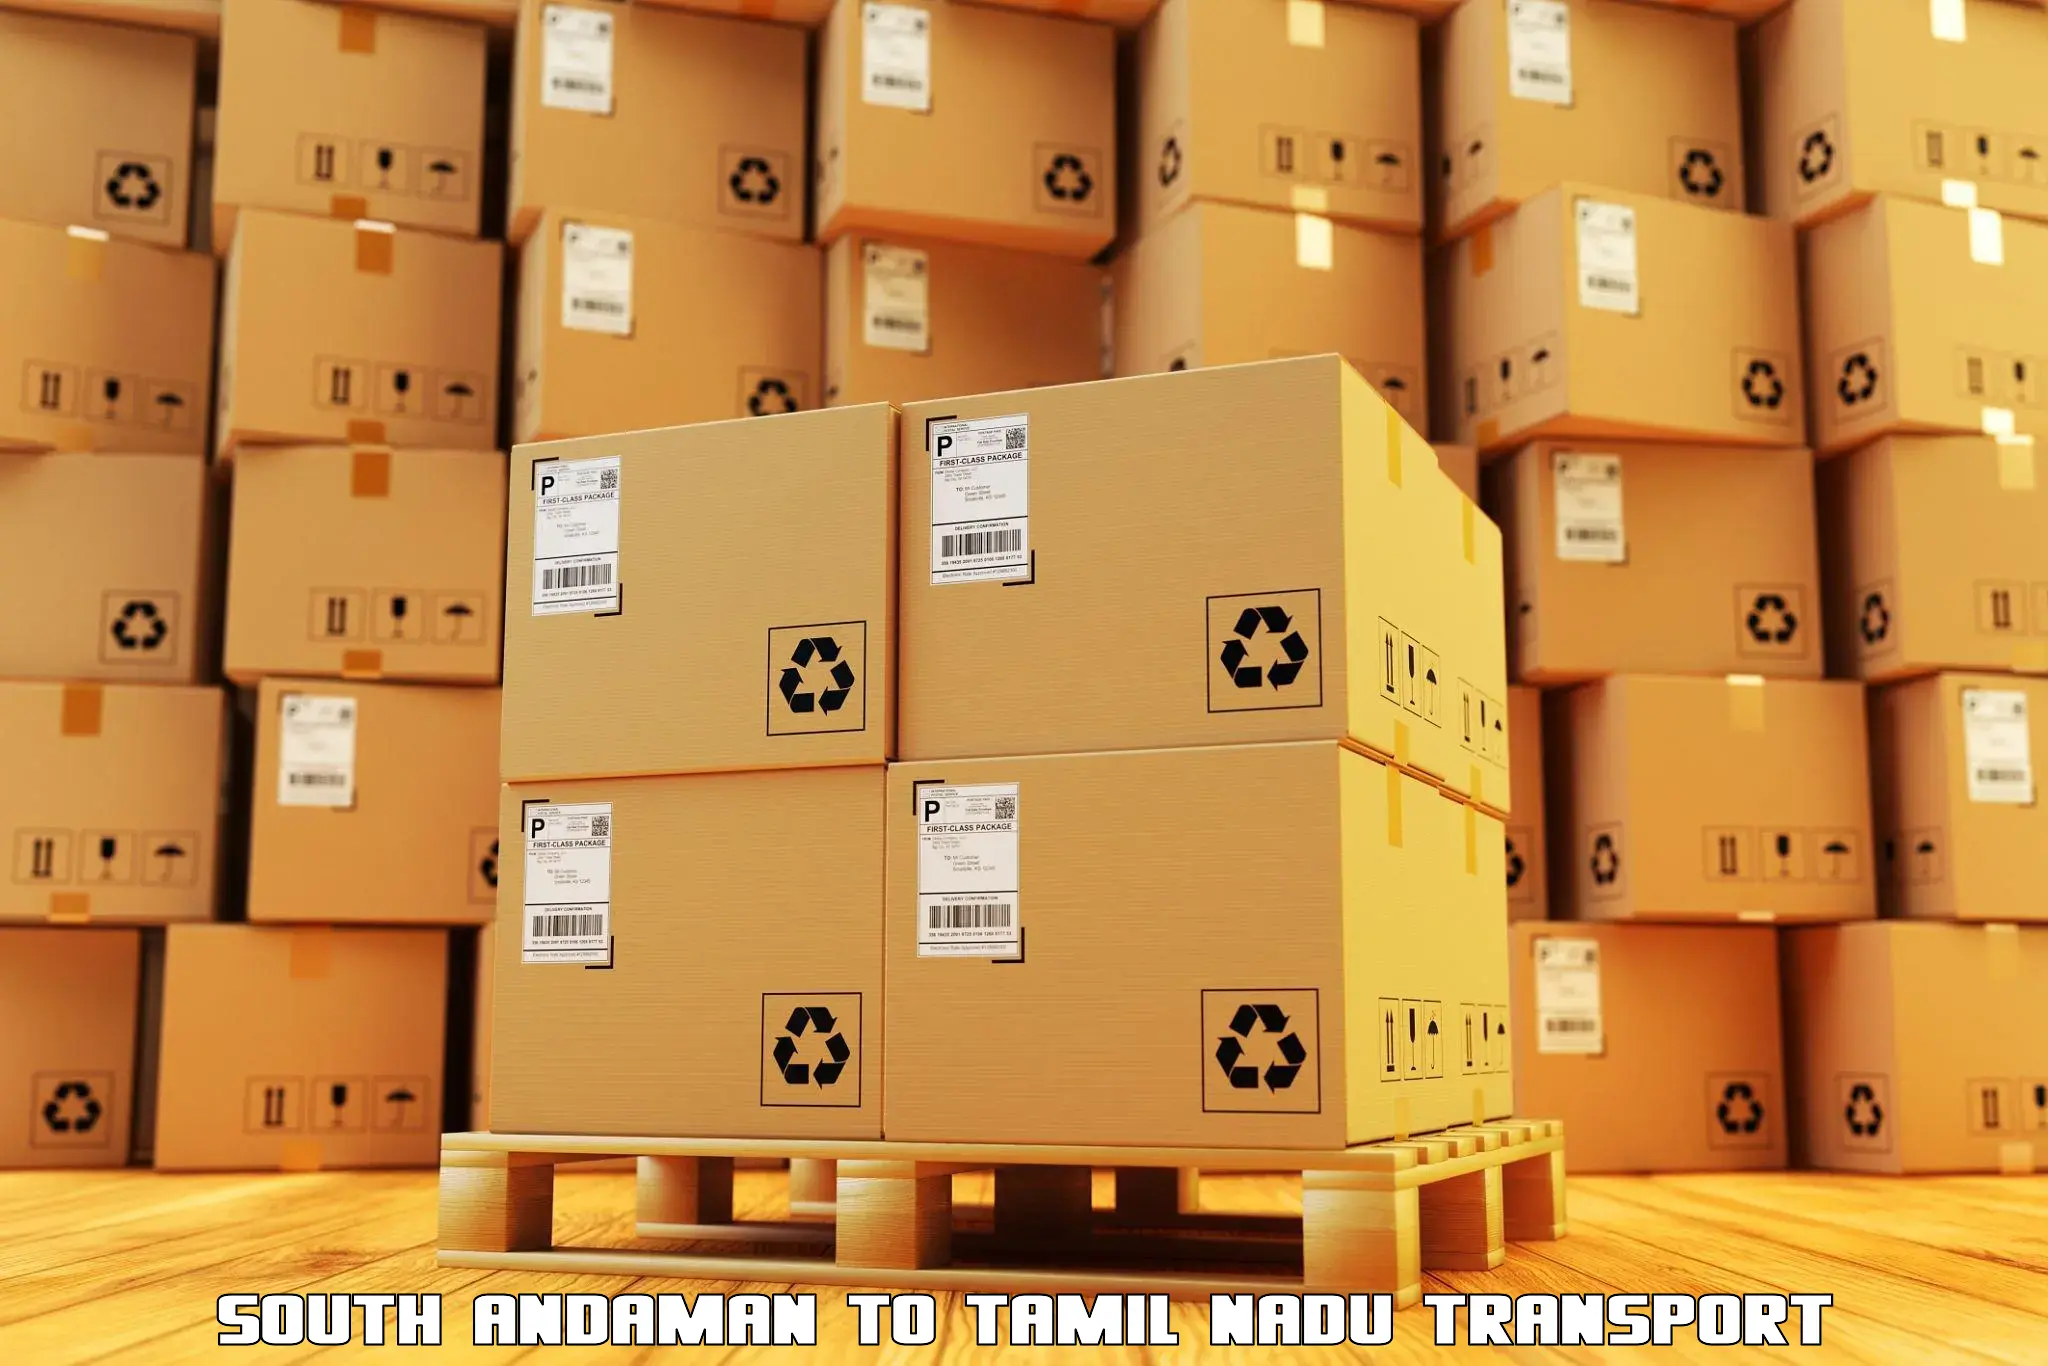 Container transport service South Andaman to Tamil Nadu